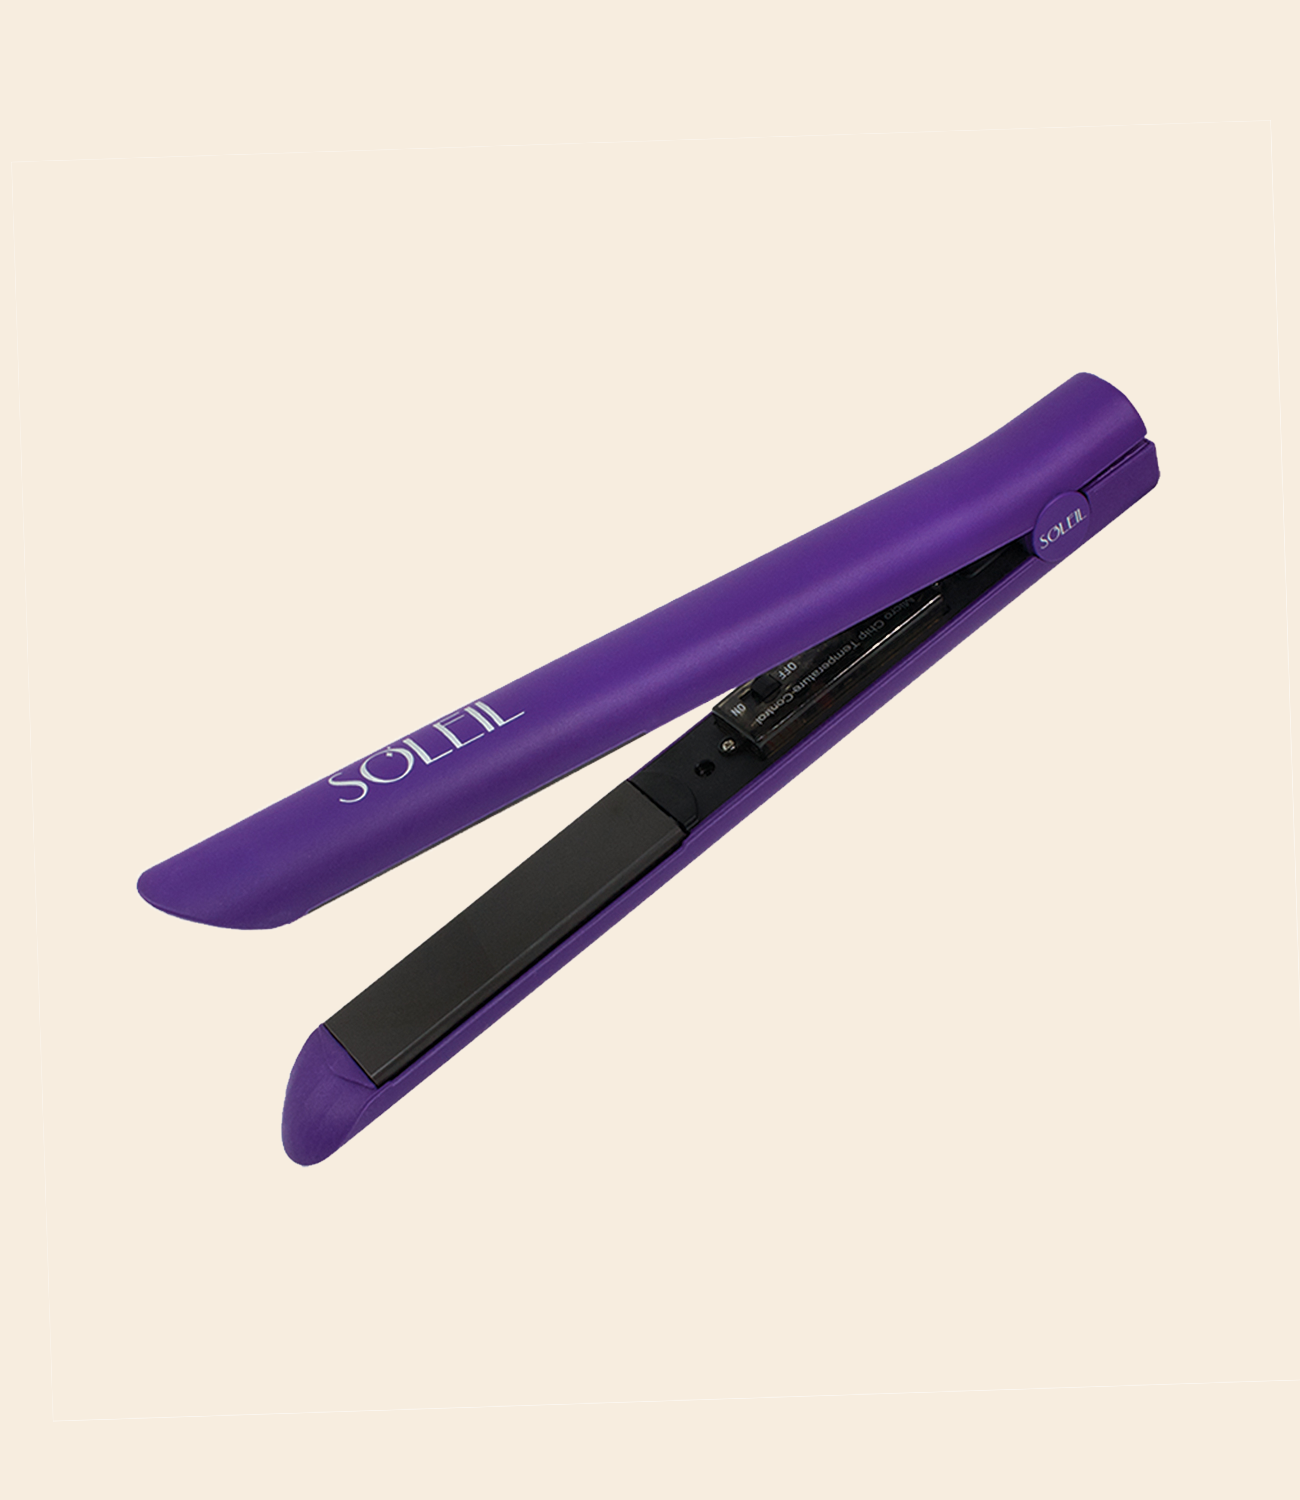 purple soleil flat iron with black ceramic plate and details, with on and off button